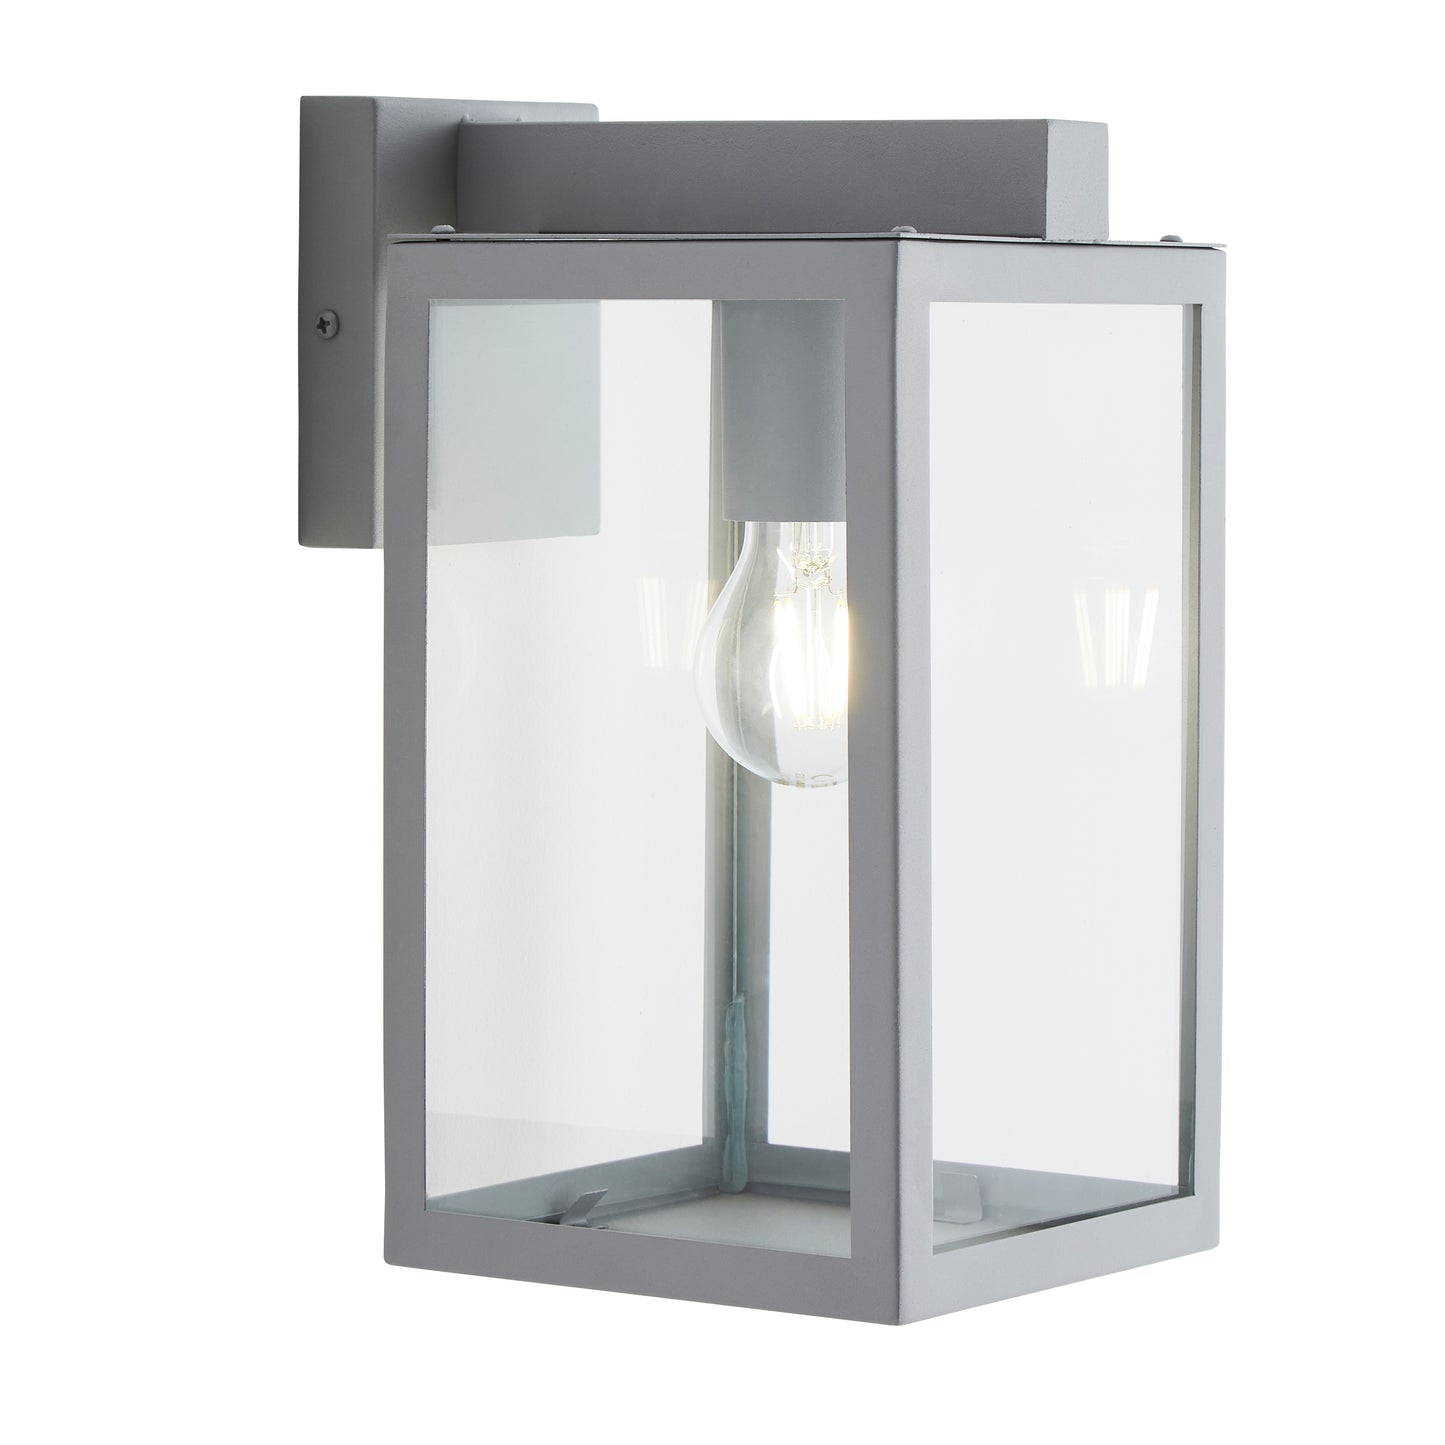 A modern take on a traditional design outdoor wall light perfect for adding style and security The traditional front-door lantern has had a modern make over in the form of our Archie  outdoor wall light with its square silver stainless steel construction with a silver finish and completed with clear glass windows this light this is sure to add an statement to any wall. 